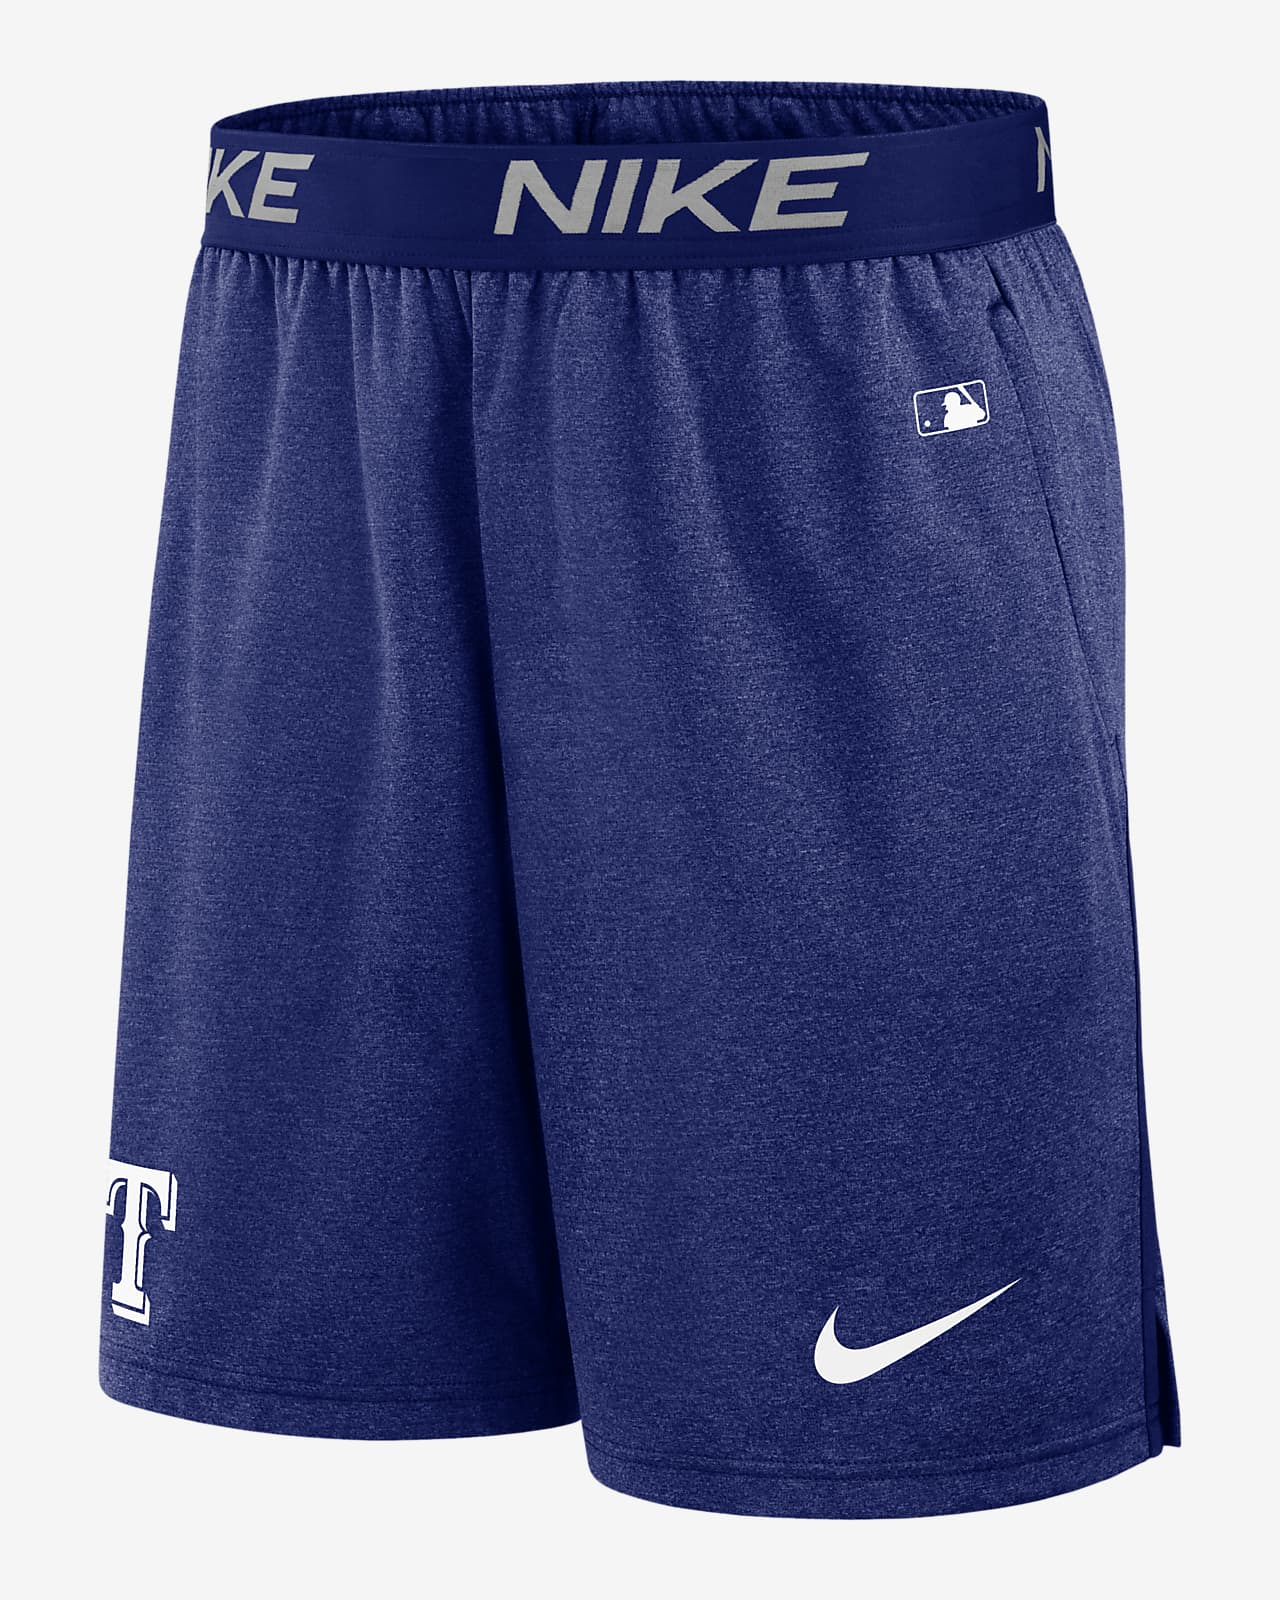 Texas Rangers Authentic Collection Practice Men's Nike Dri-FIT MLB Shorts